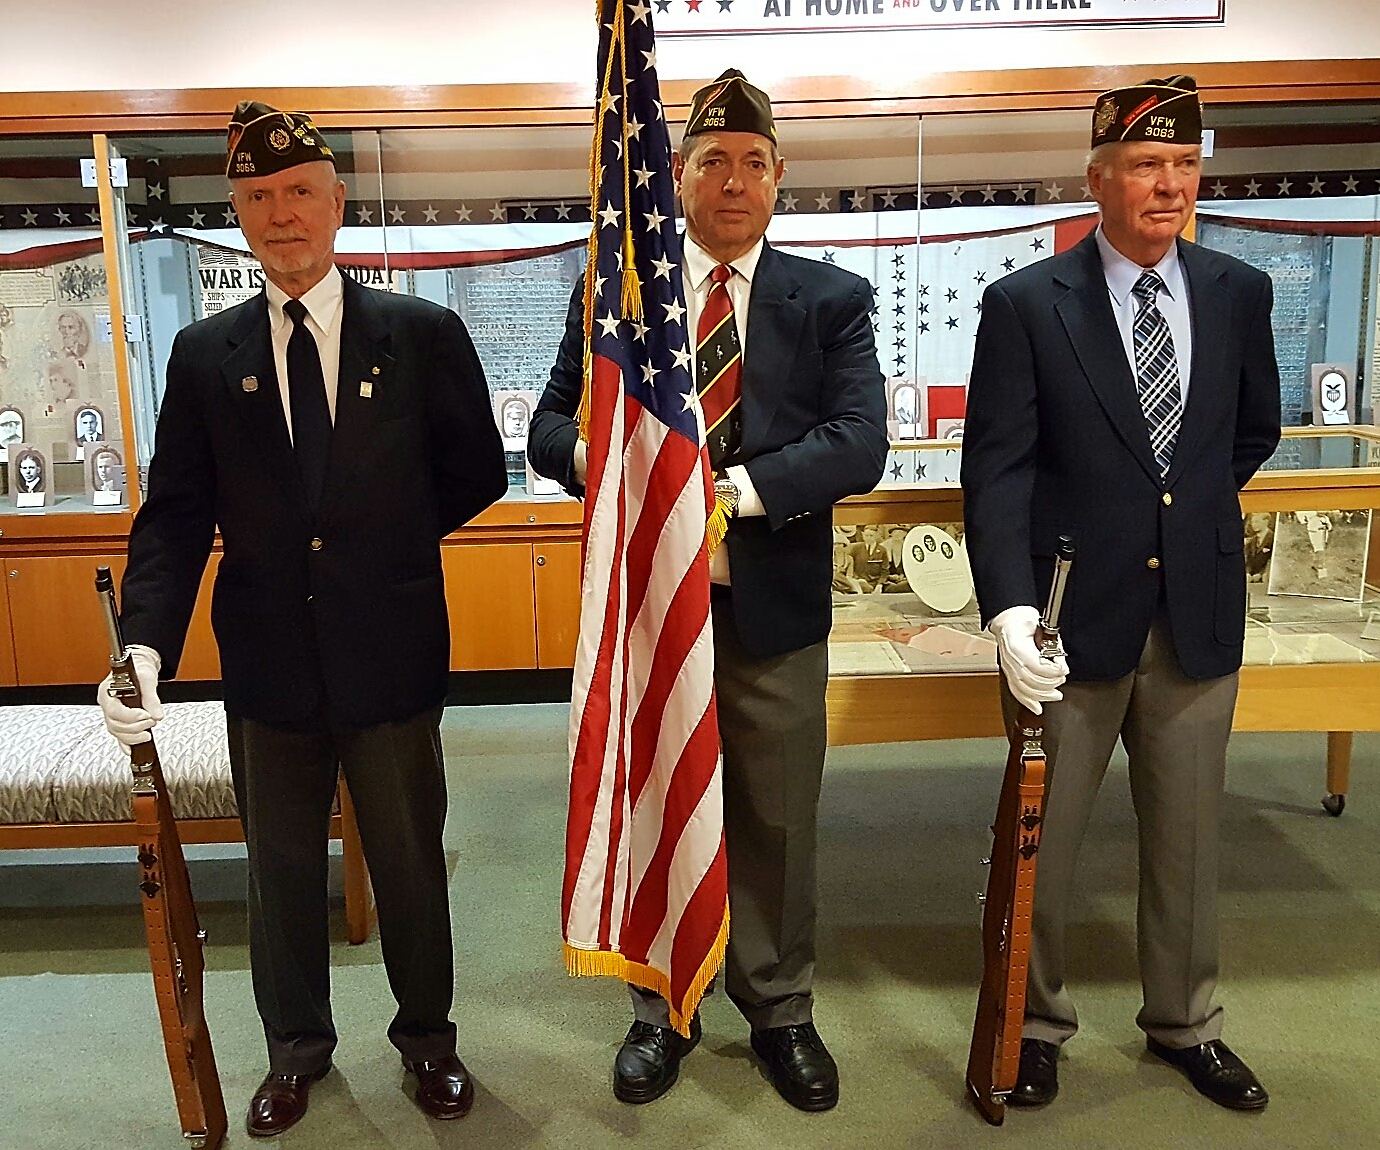 From left, Harold Rodenberger, Joe Fitzgerald, and Bill Hoeller in color guard formation for the UW event.